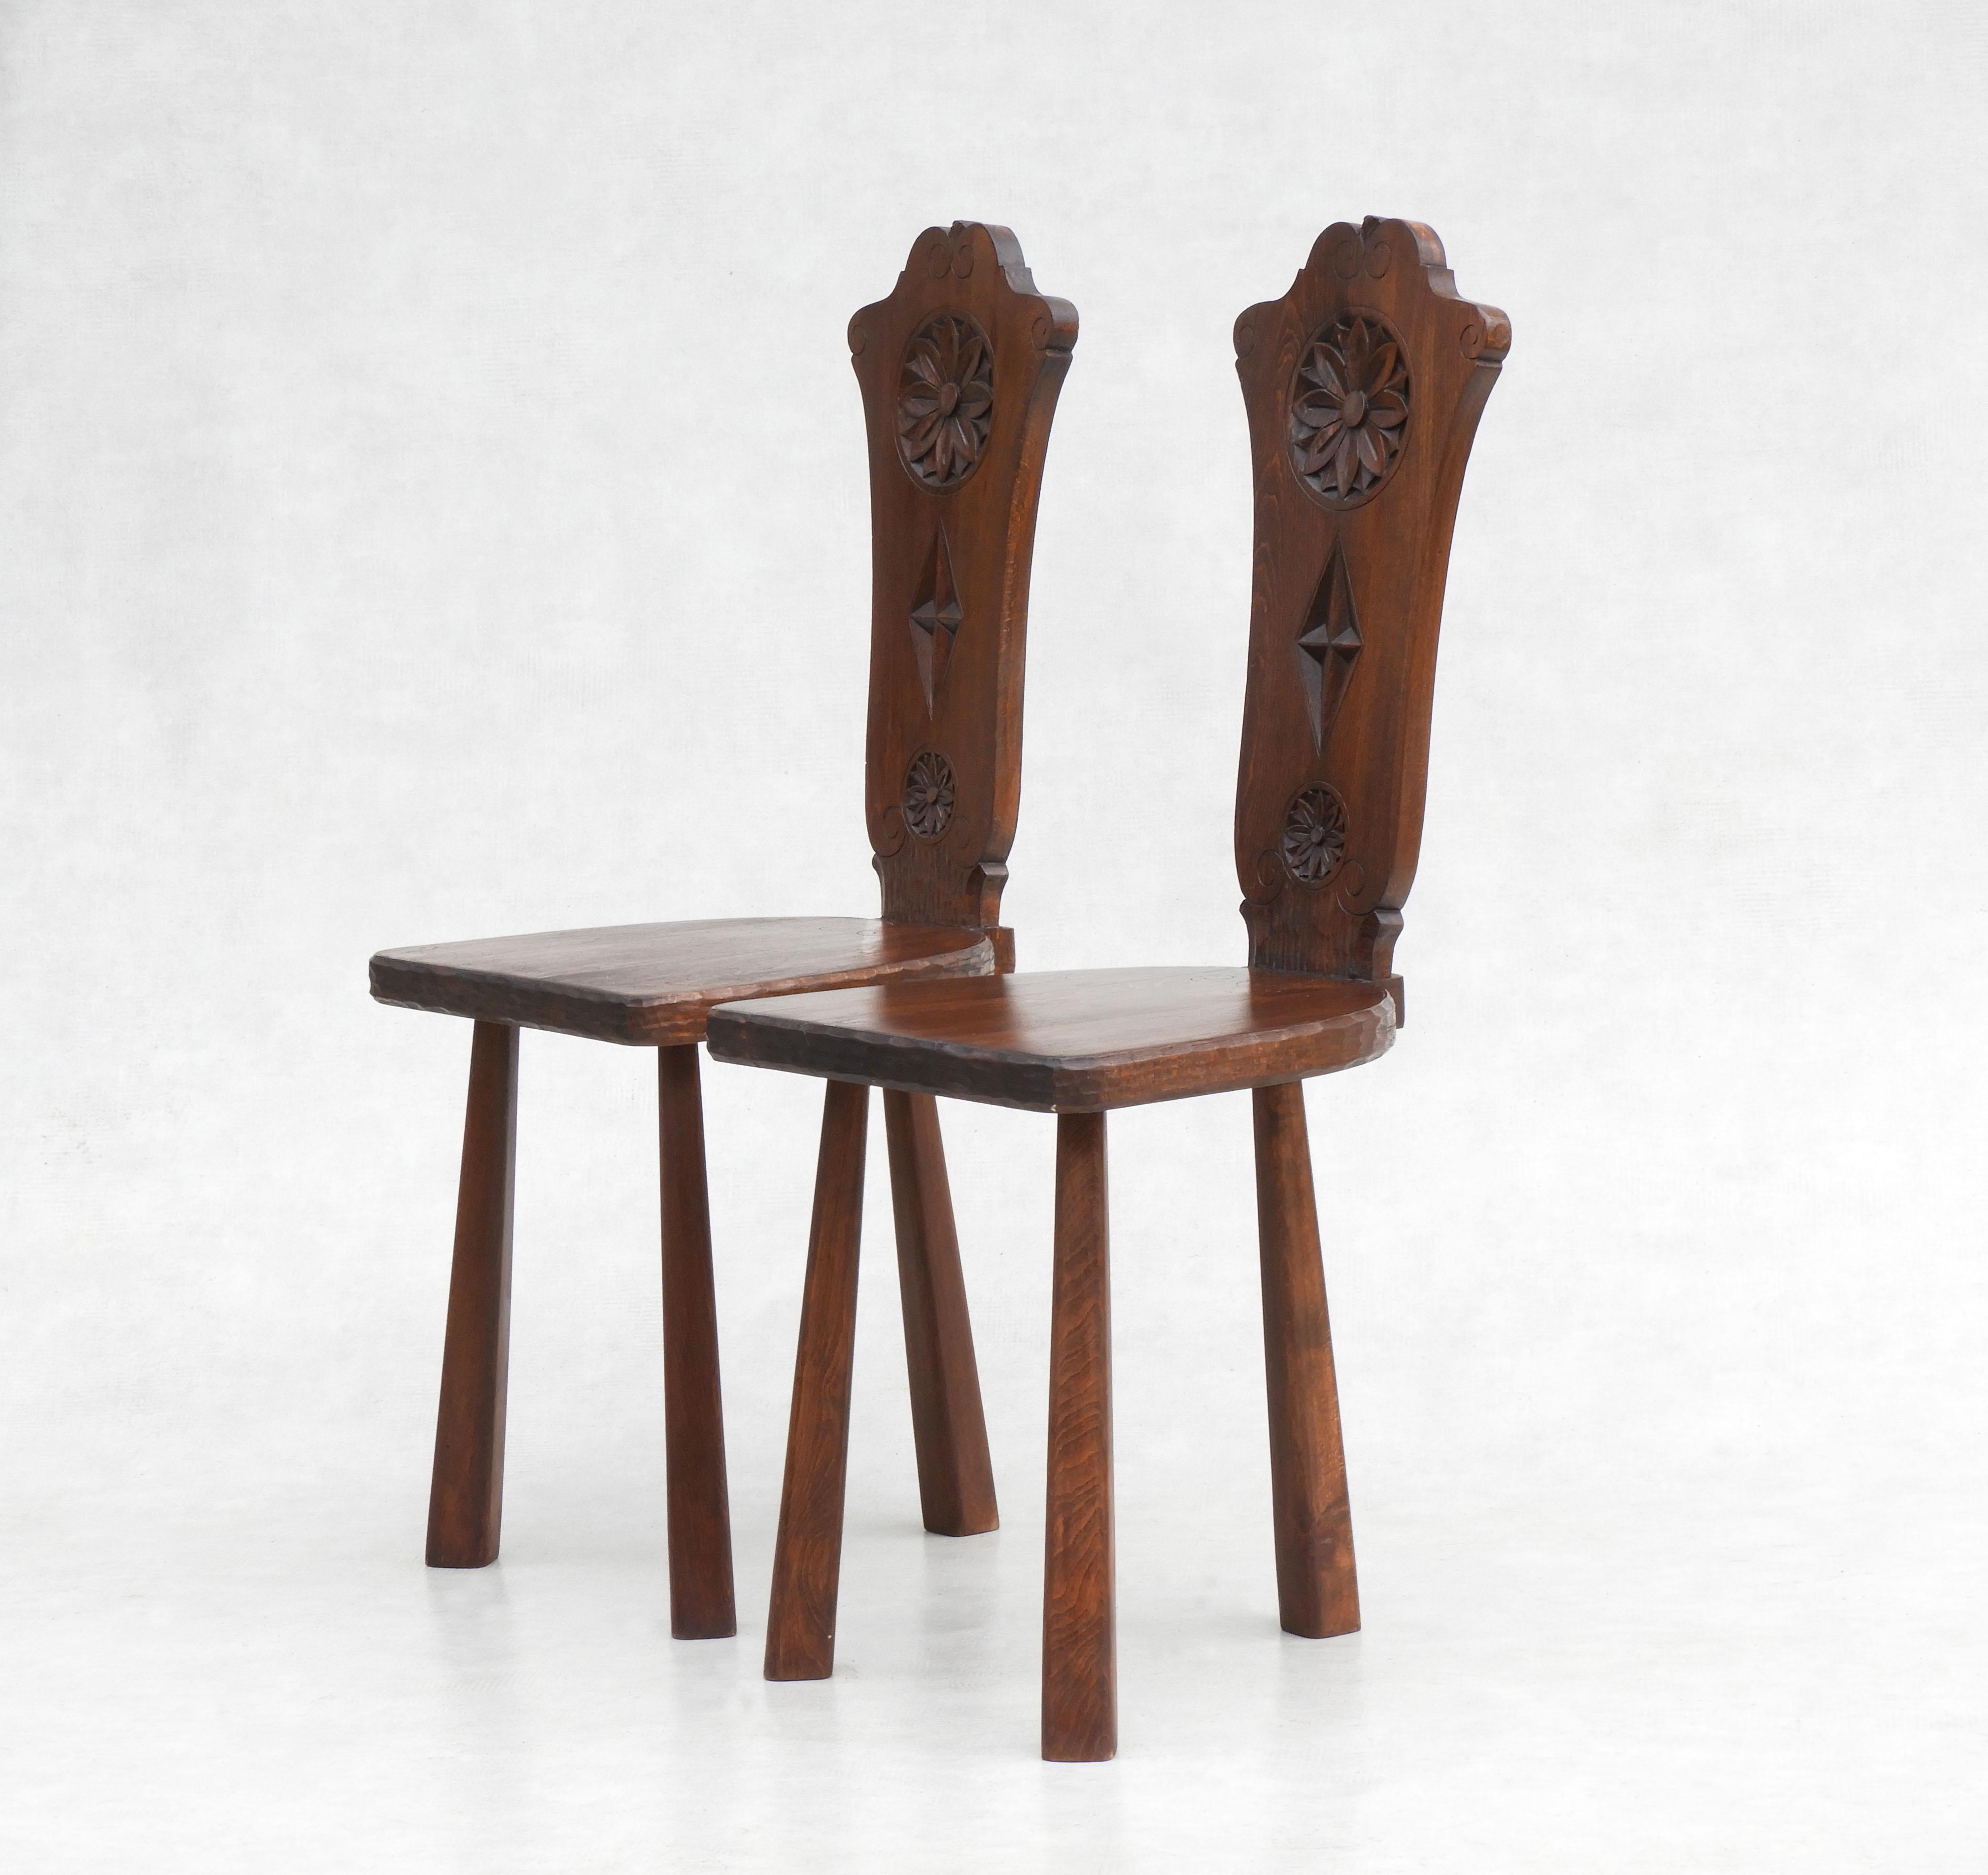 Carved Pair of Basque Tripod Chairs 1950s European Folk Art For Sale